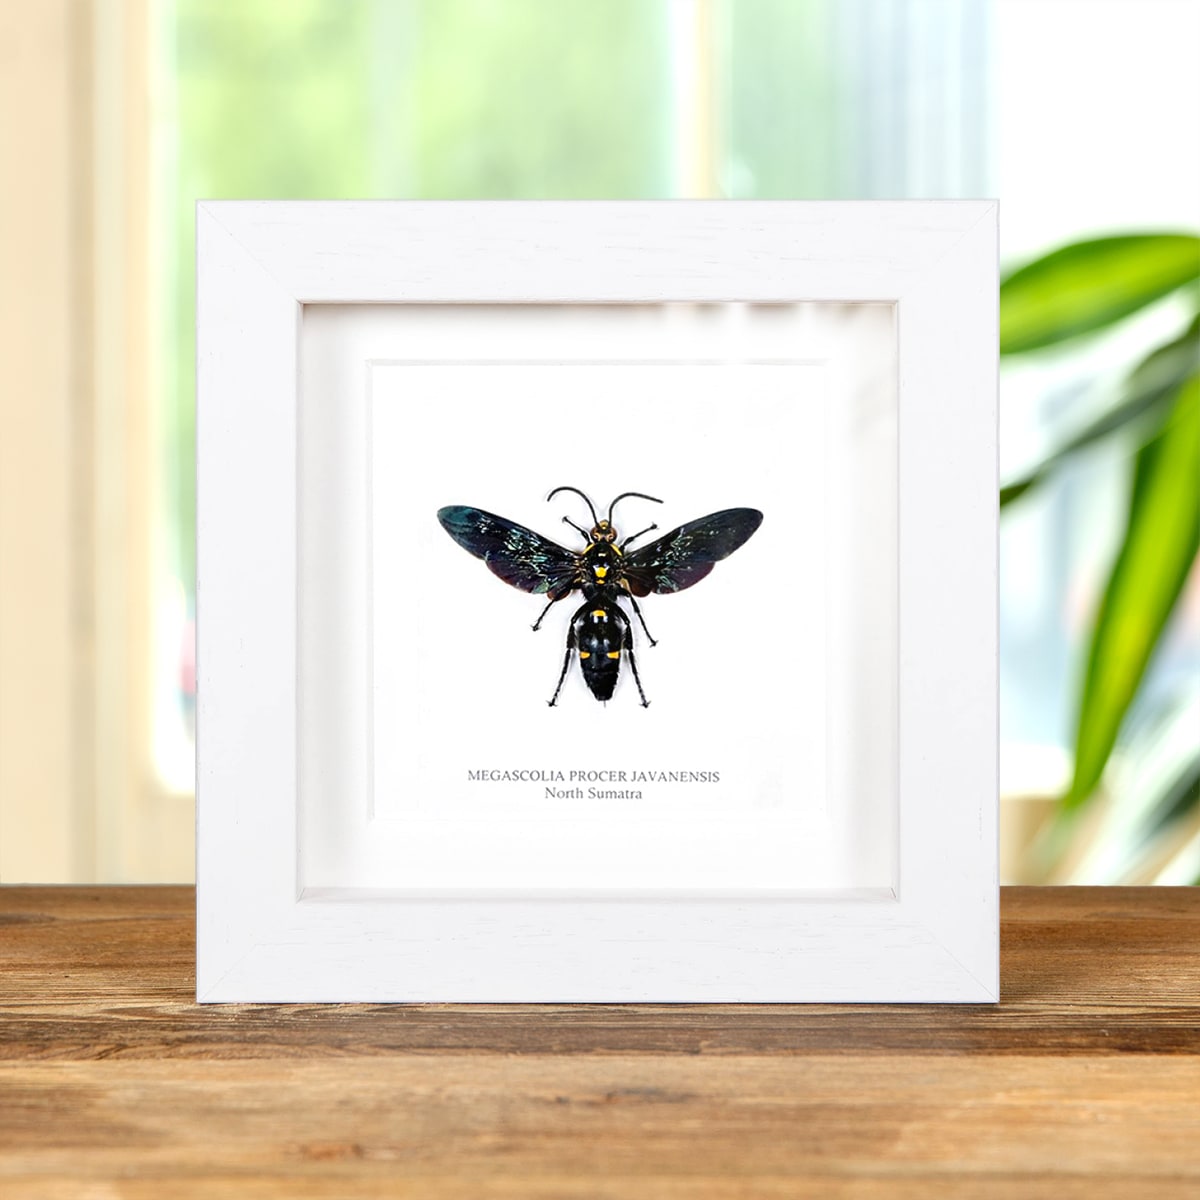 Giant Scoliid Wasp in Box Frame (Megascolia procer javanesis)